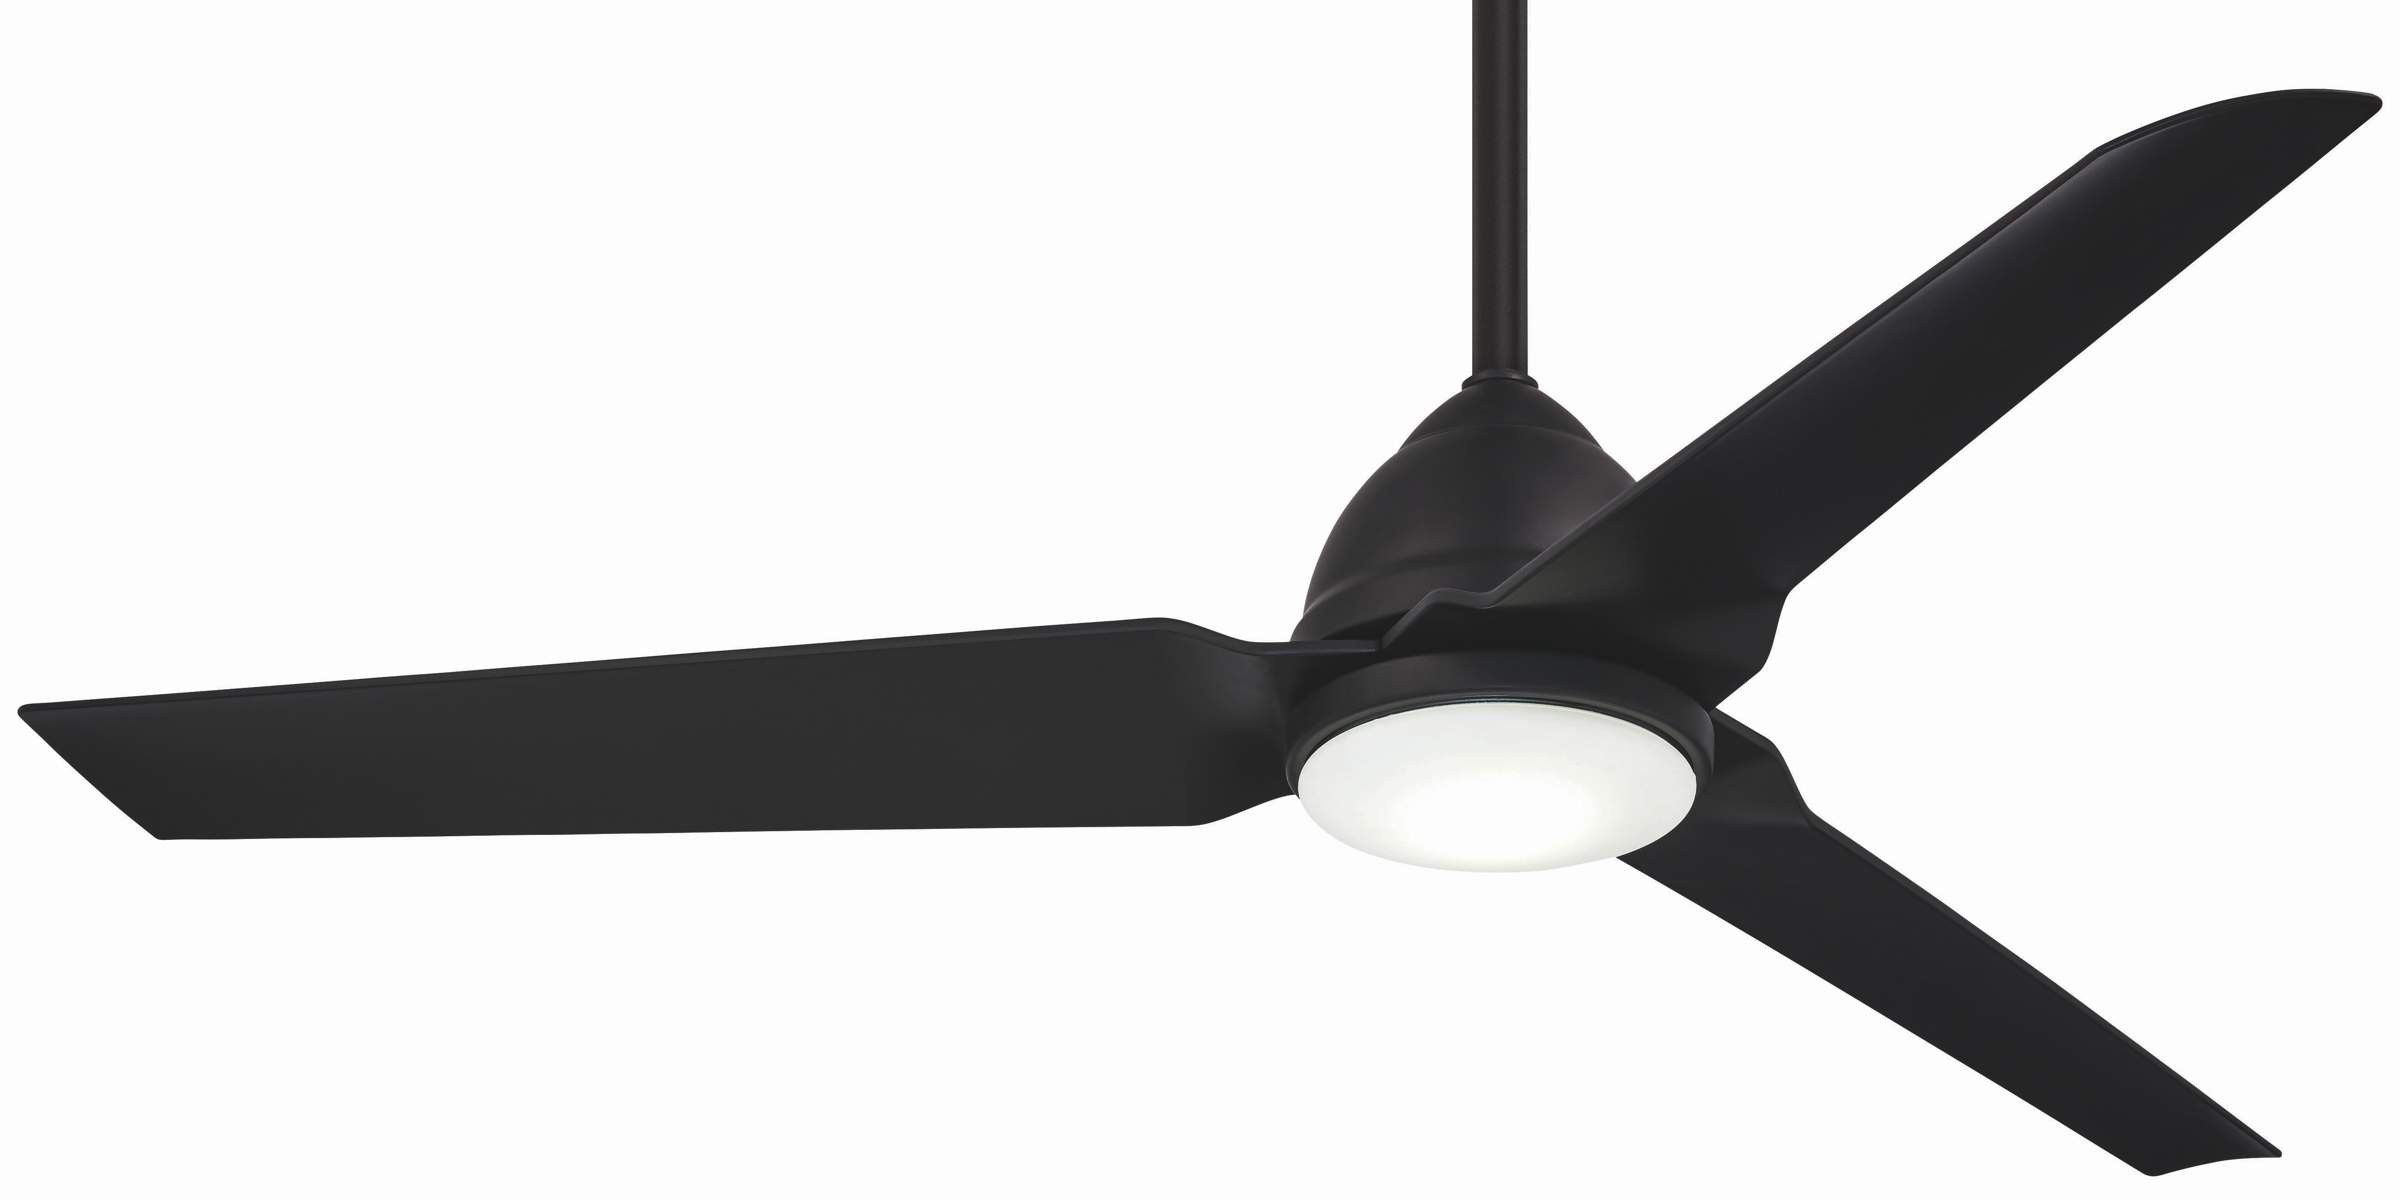 Fashionable Minka Aire Java Led Ceiling Fan Model F753lcl In Coal Intended For Java 3 Blade Outdoor Led Ceiling Fans (View 9 of 20)